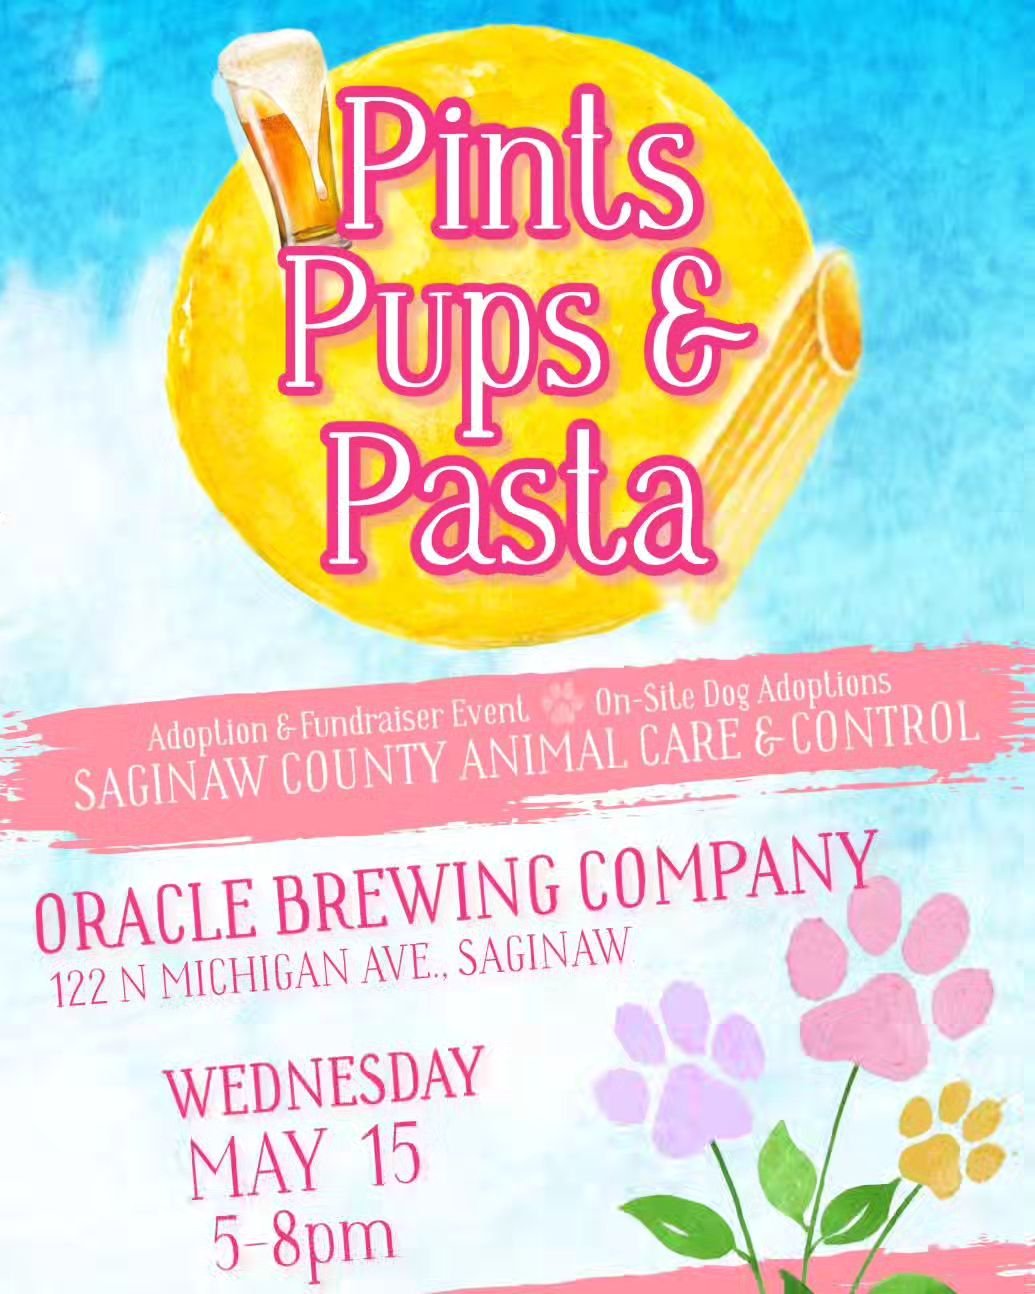 SAVE THE DATE!  The next Pints, Pups, &amp; Pasta event will be here on Wednesday, May 15 from 5-8pm. Free pasta provided by Artisan Urban Bistro.  Saginaw County Animal Care &amp; Control  will have some adorable pups here as well, come meet your ne